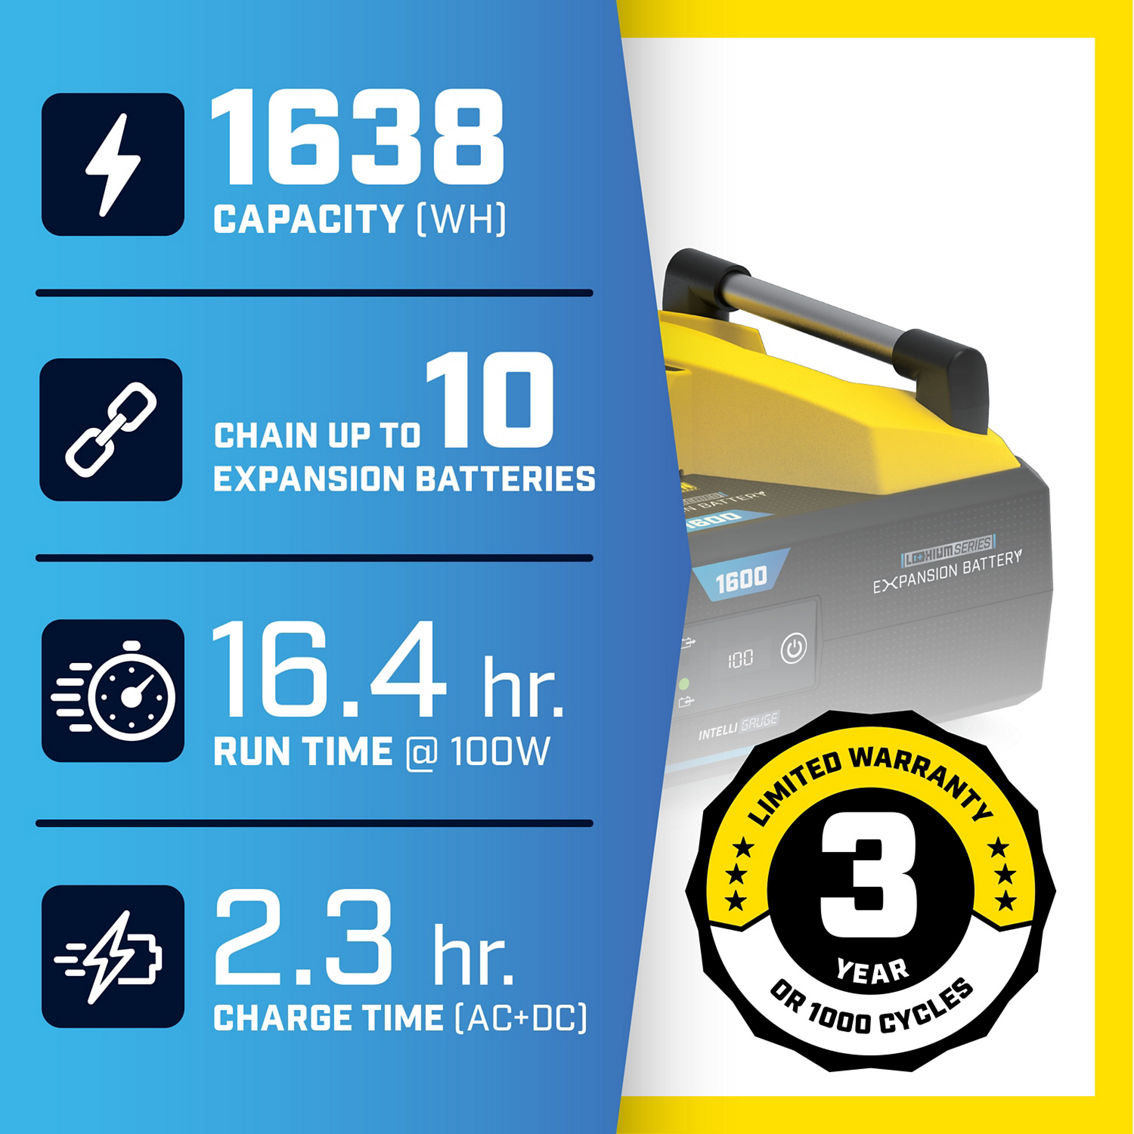 Champion 1638-Wh Li-Ion Power Station Expansion Battery - Image 6 of 9